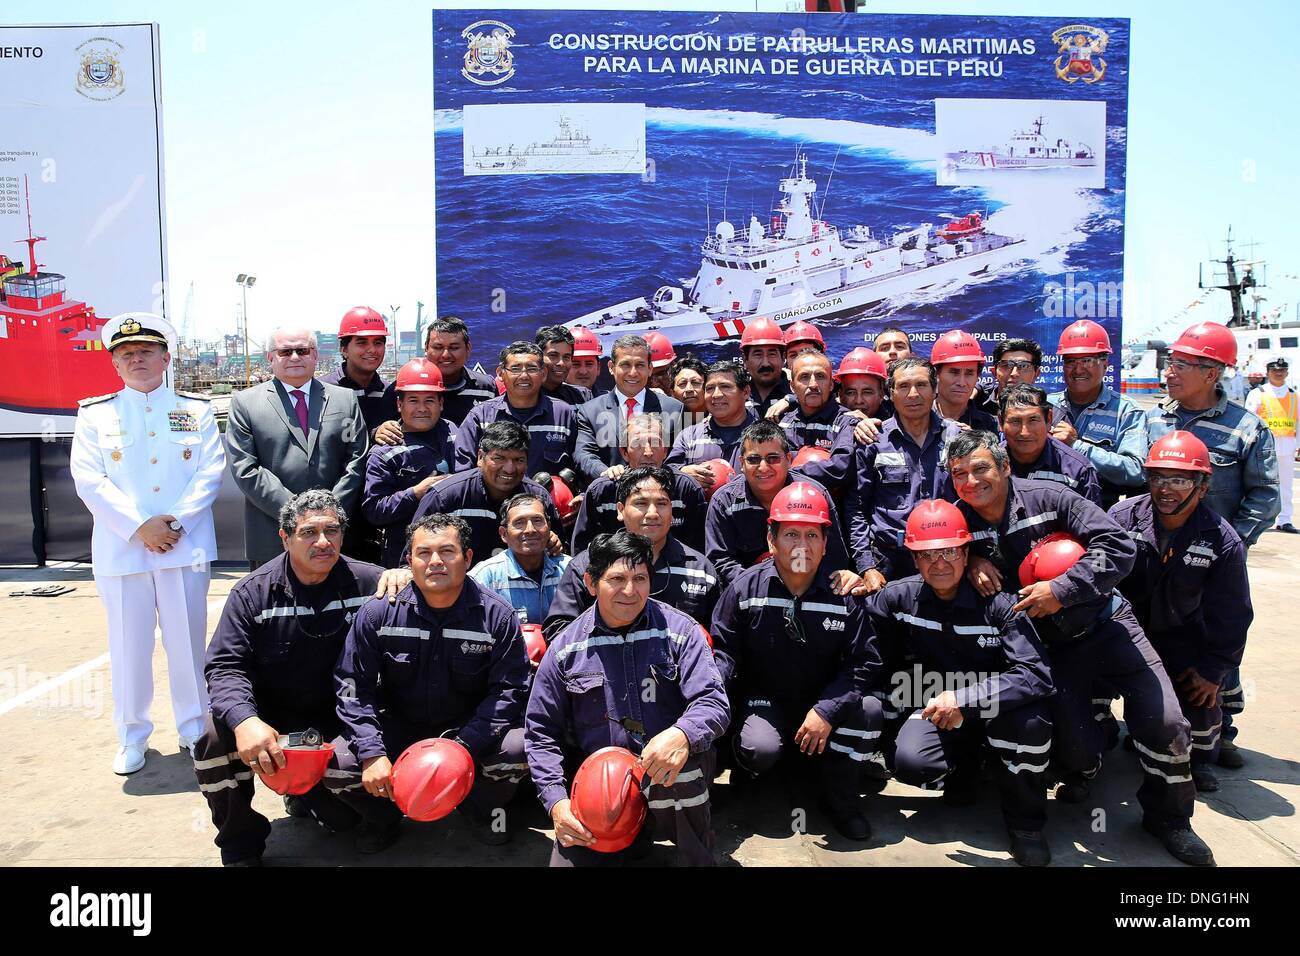 Callao, Peru. 26th Dec, 2013. Image provided by Peru's Presidency shows of Peruvian President Ollanta Humala (C, back), posing with workers of the Navy's Industrial Services (SIMA, for its acronym in Spanish), in Callao, Peru, on Dec. 26, 2013. Credit:  Peru's Presidency/Xinhua/Alamy Live News Stock Photo